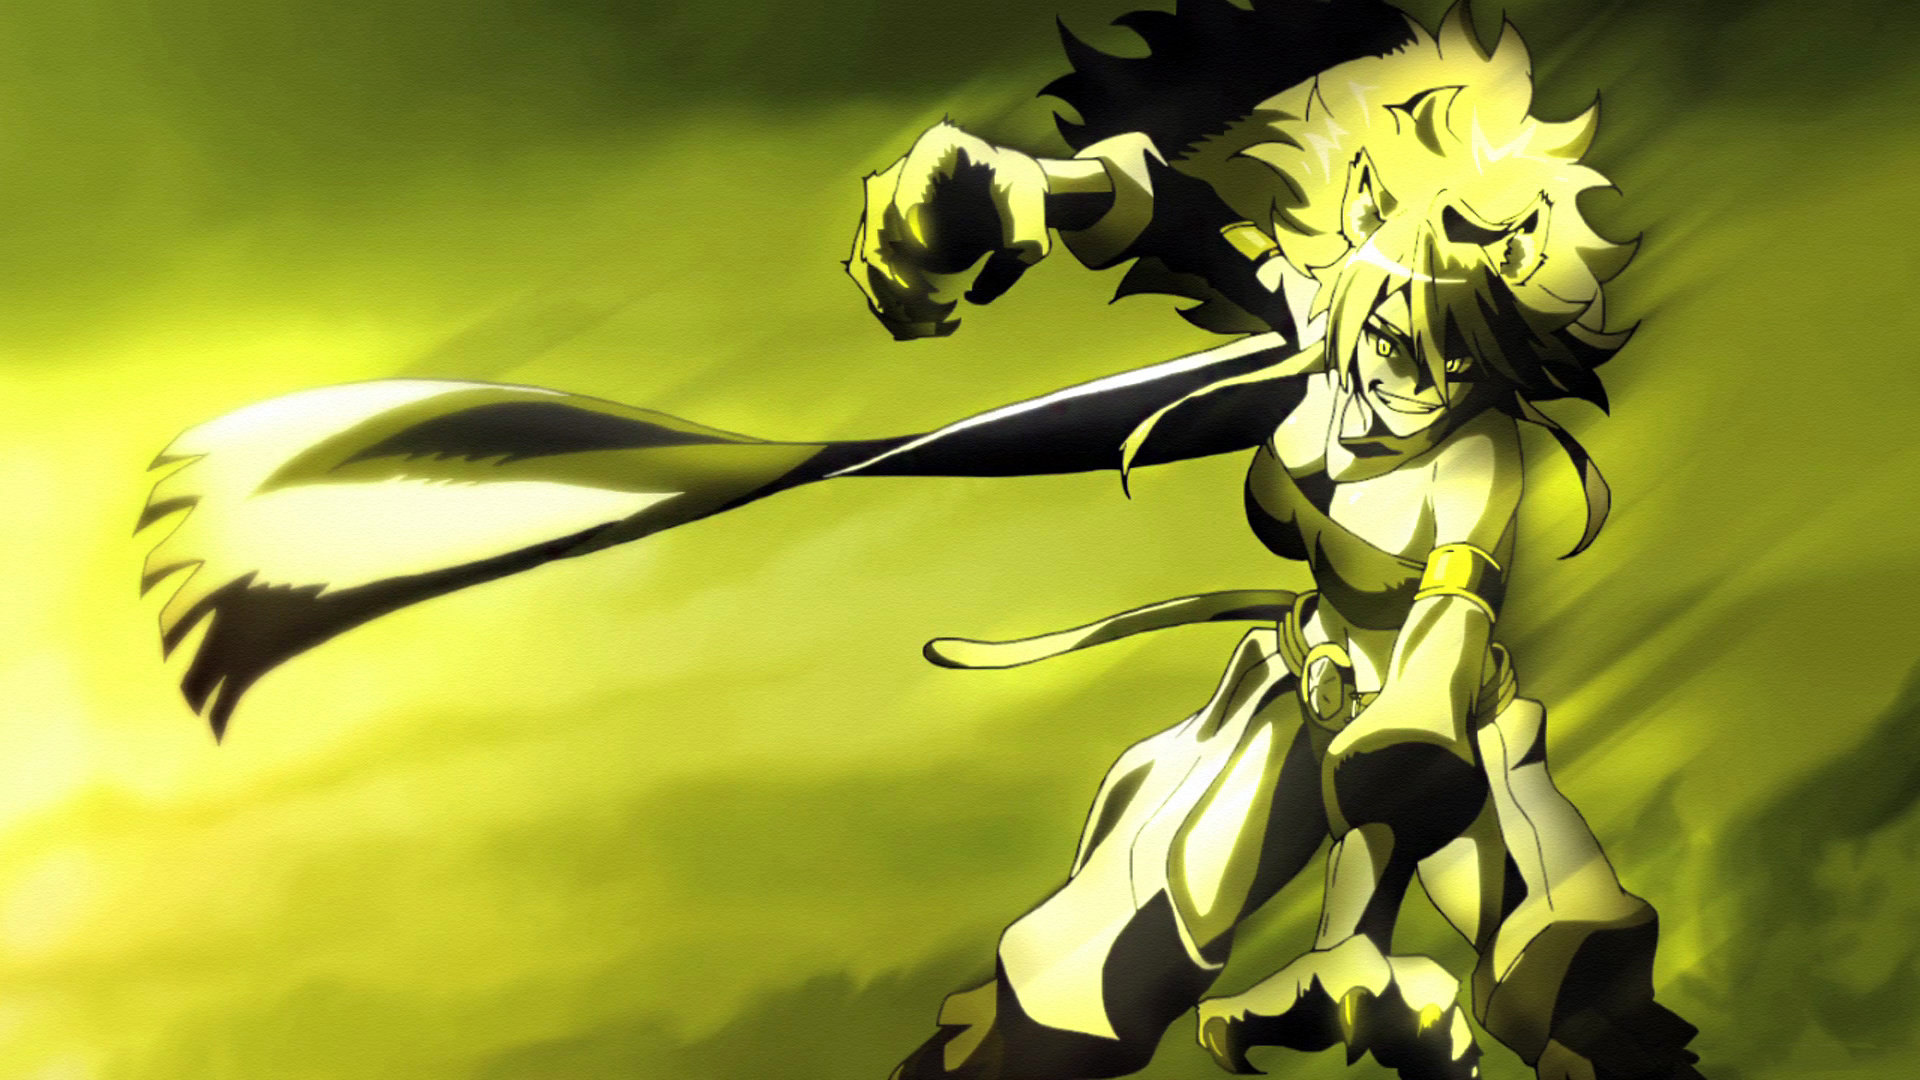 Download full hd 1920x1080 Akame Ga Kill! PC background ID:207992 for free